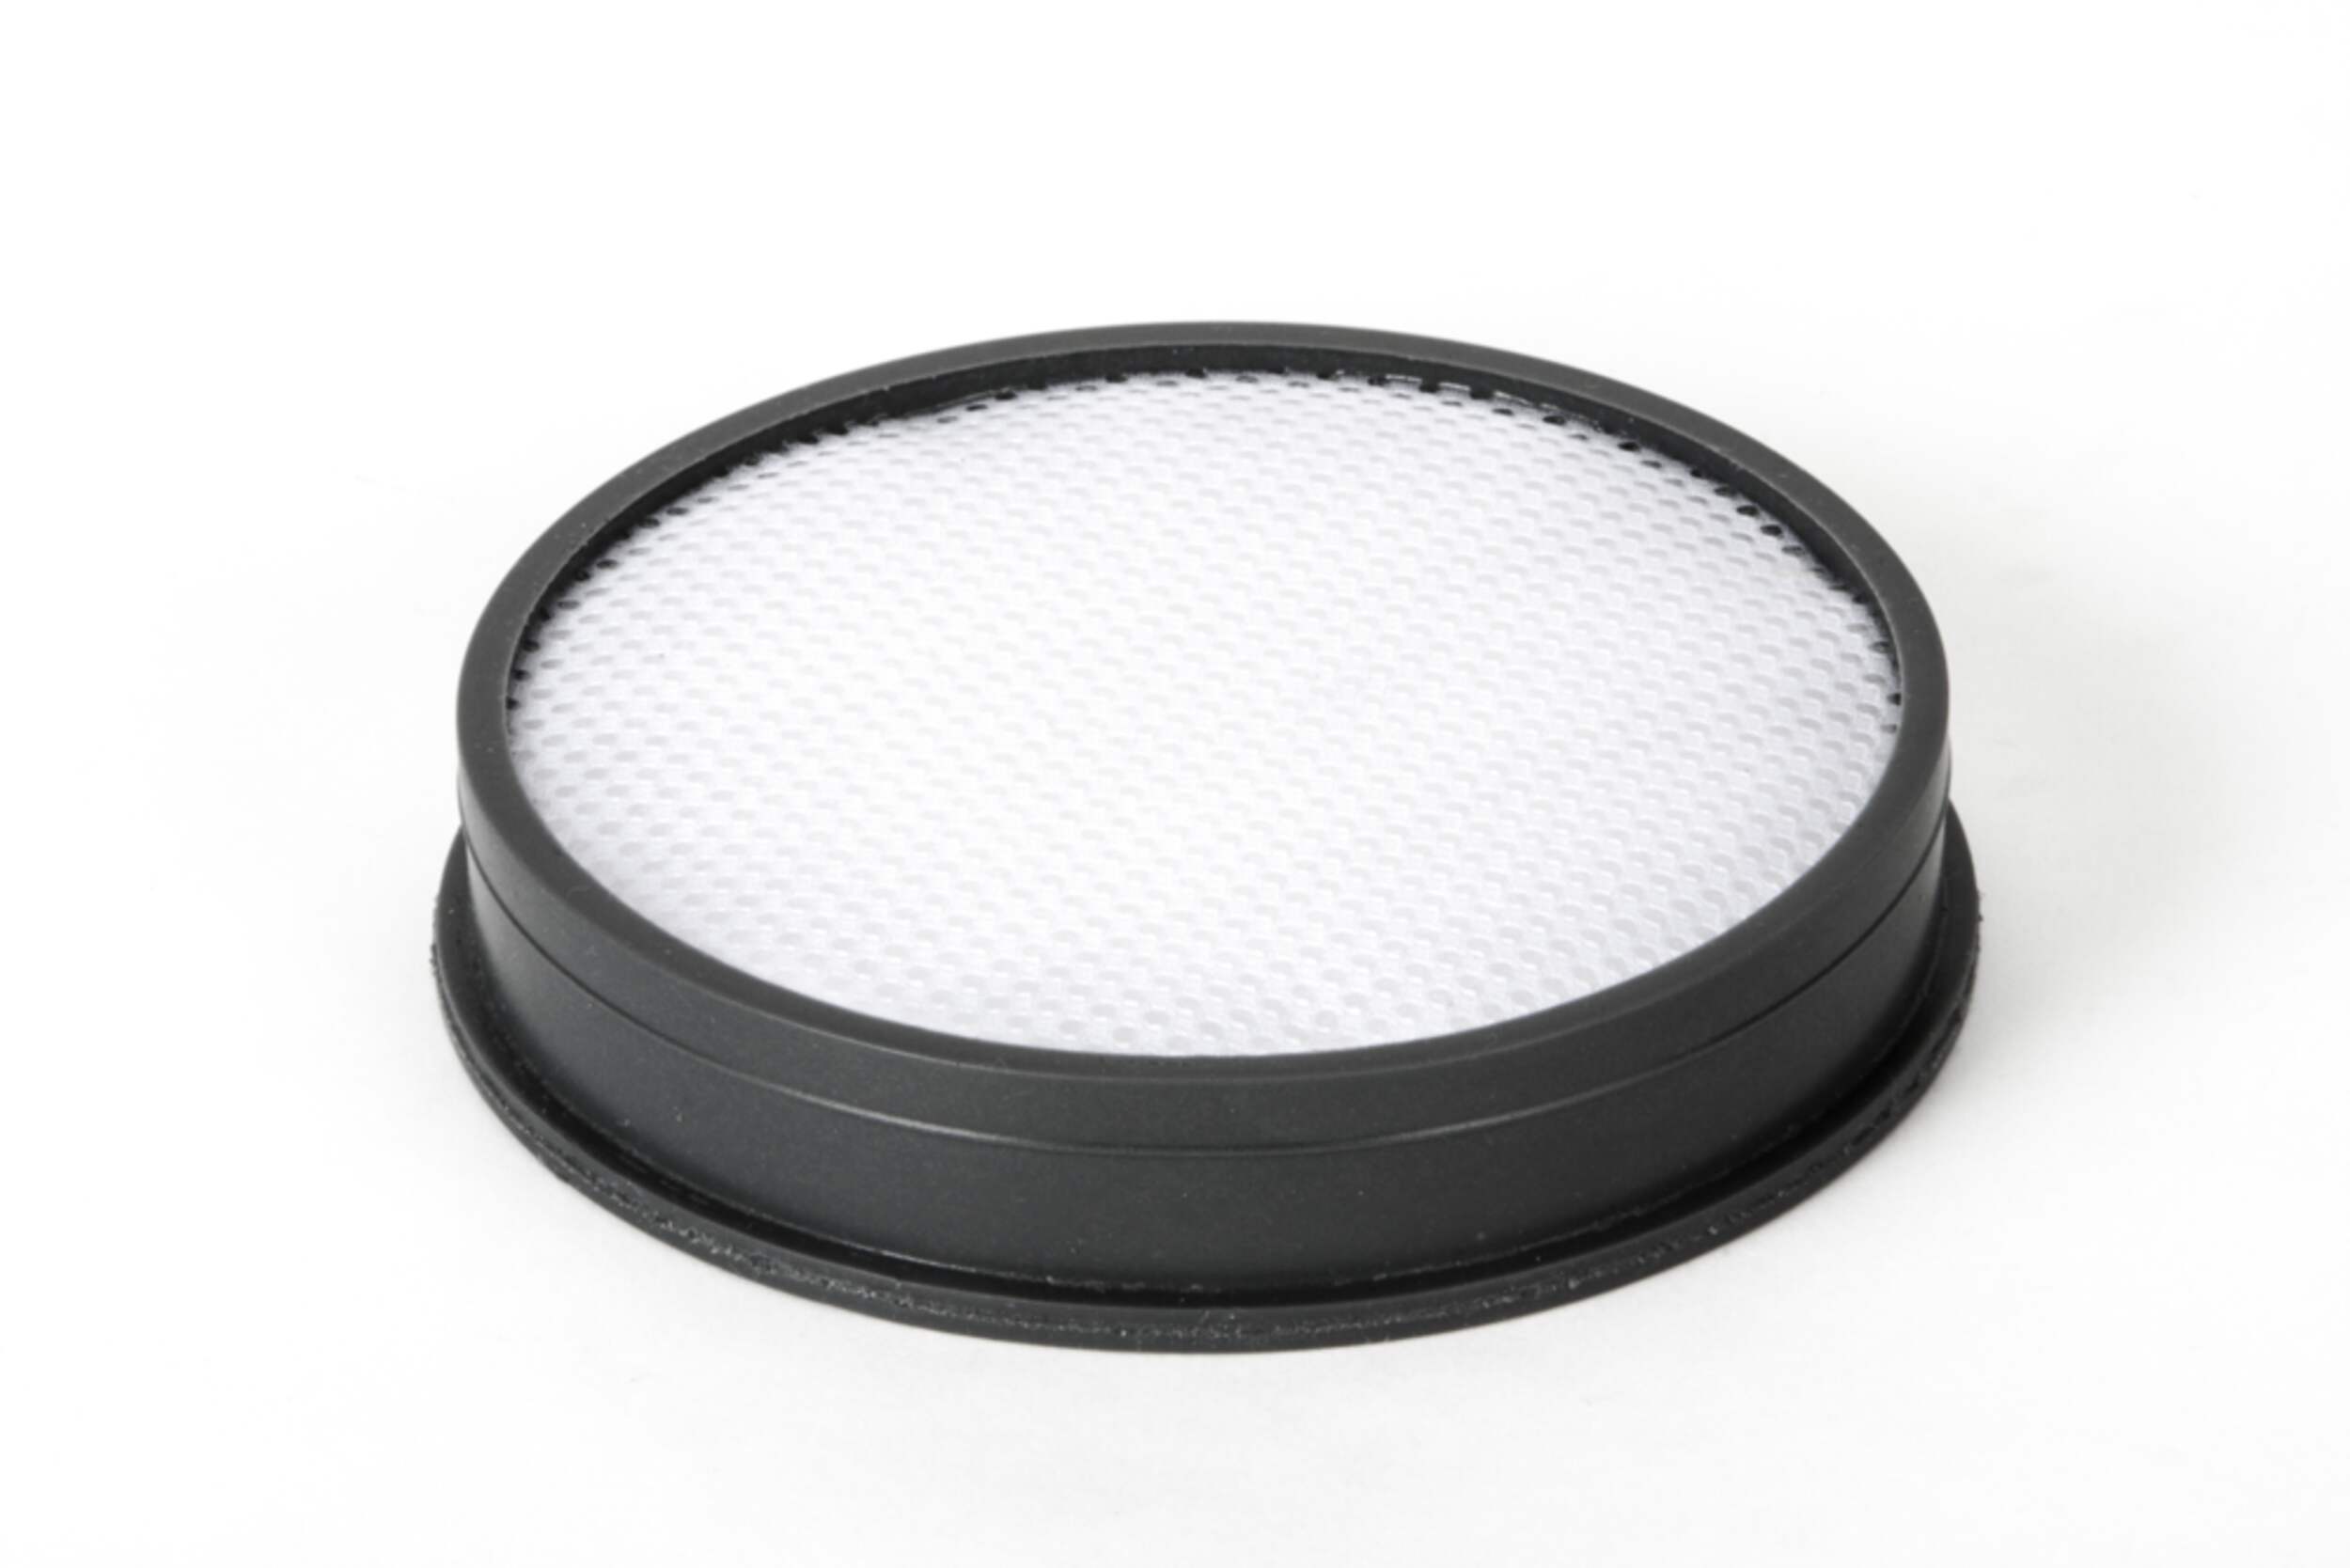 VAC Hoover WindTunnel Air Replacement Vacuum Cleaner Filter